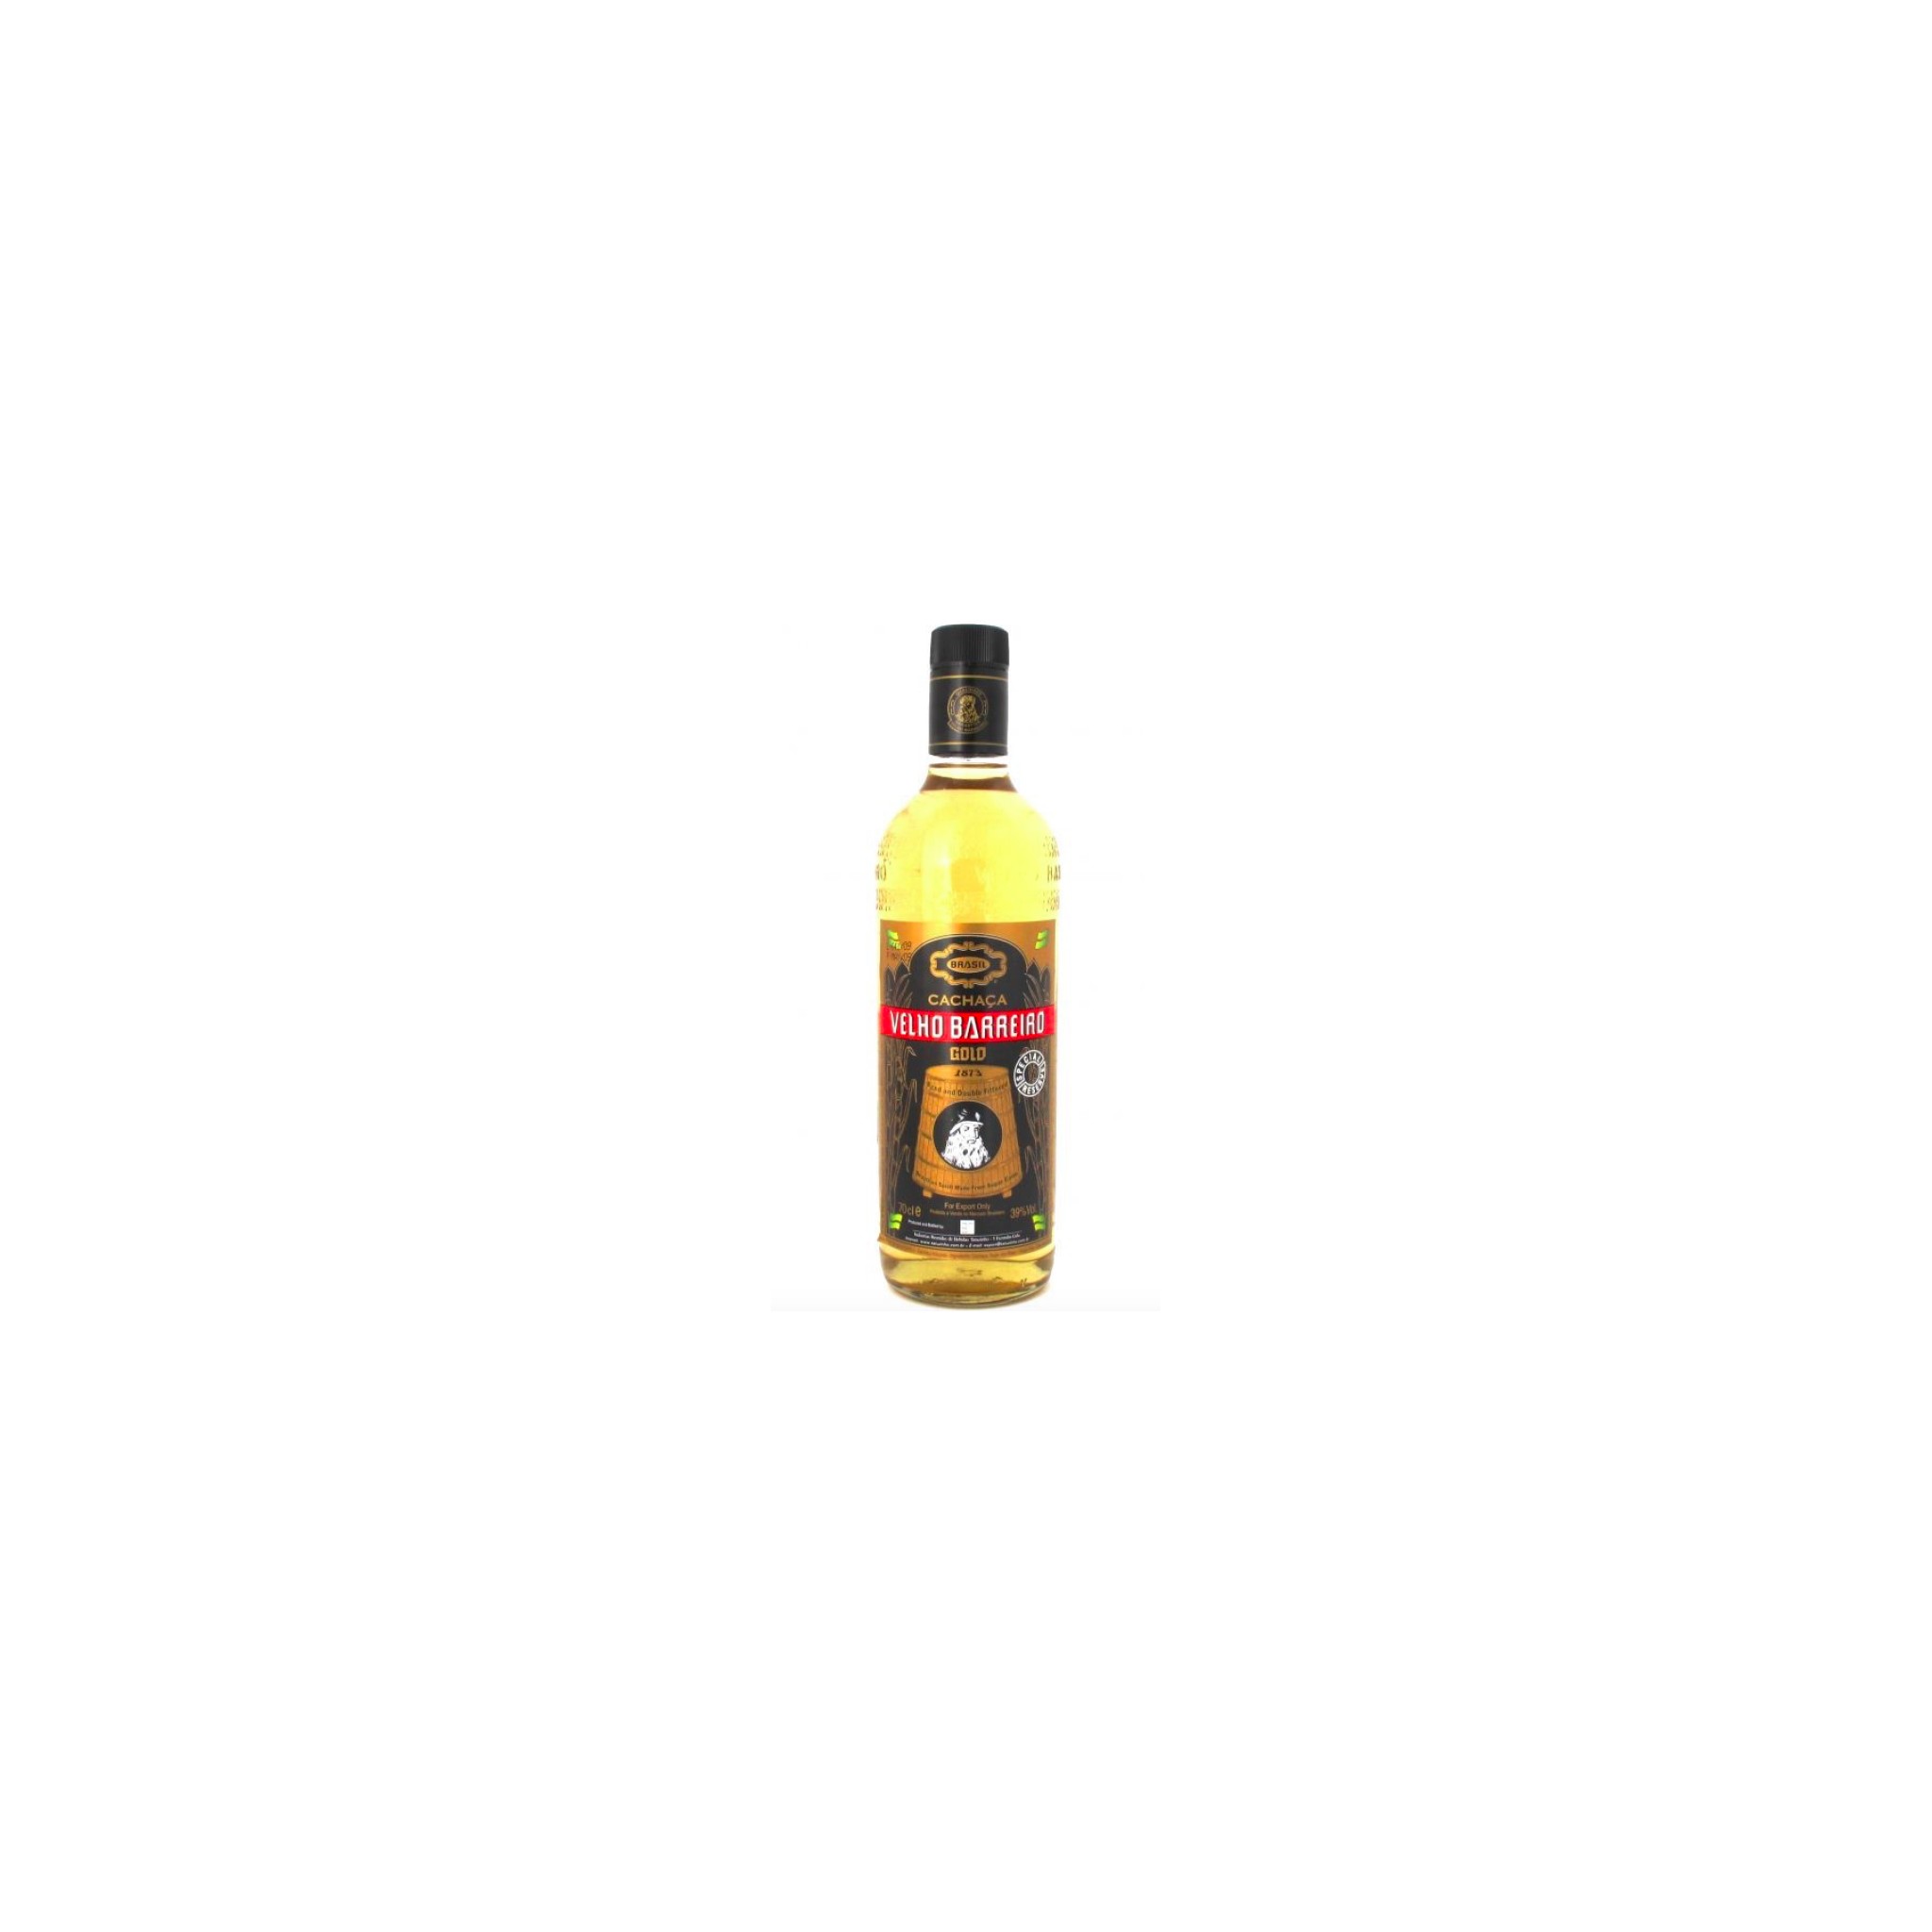 SELECTION Online OUR SPANISH BRANDY, 101 FRENCH COGNAC Vulpitta SPIRITS, OF Corso Sale